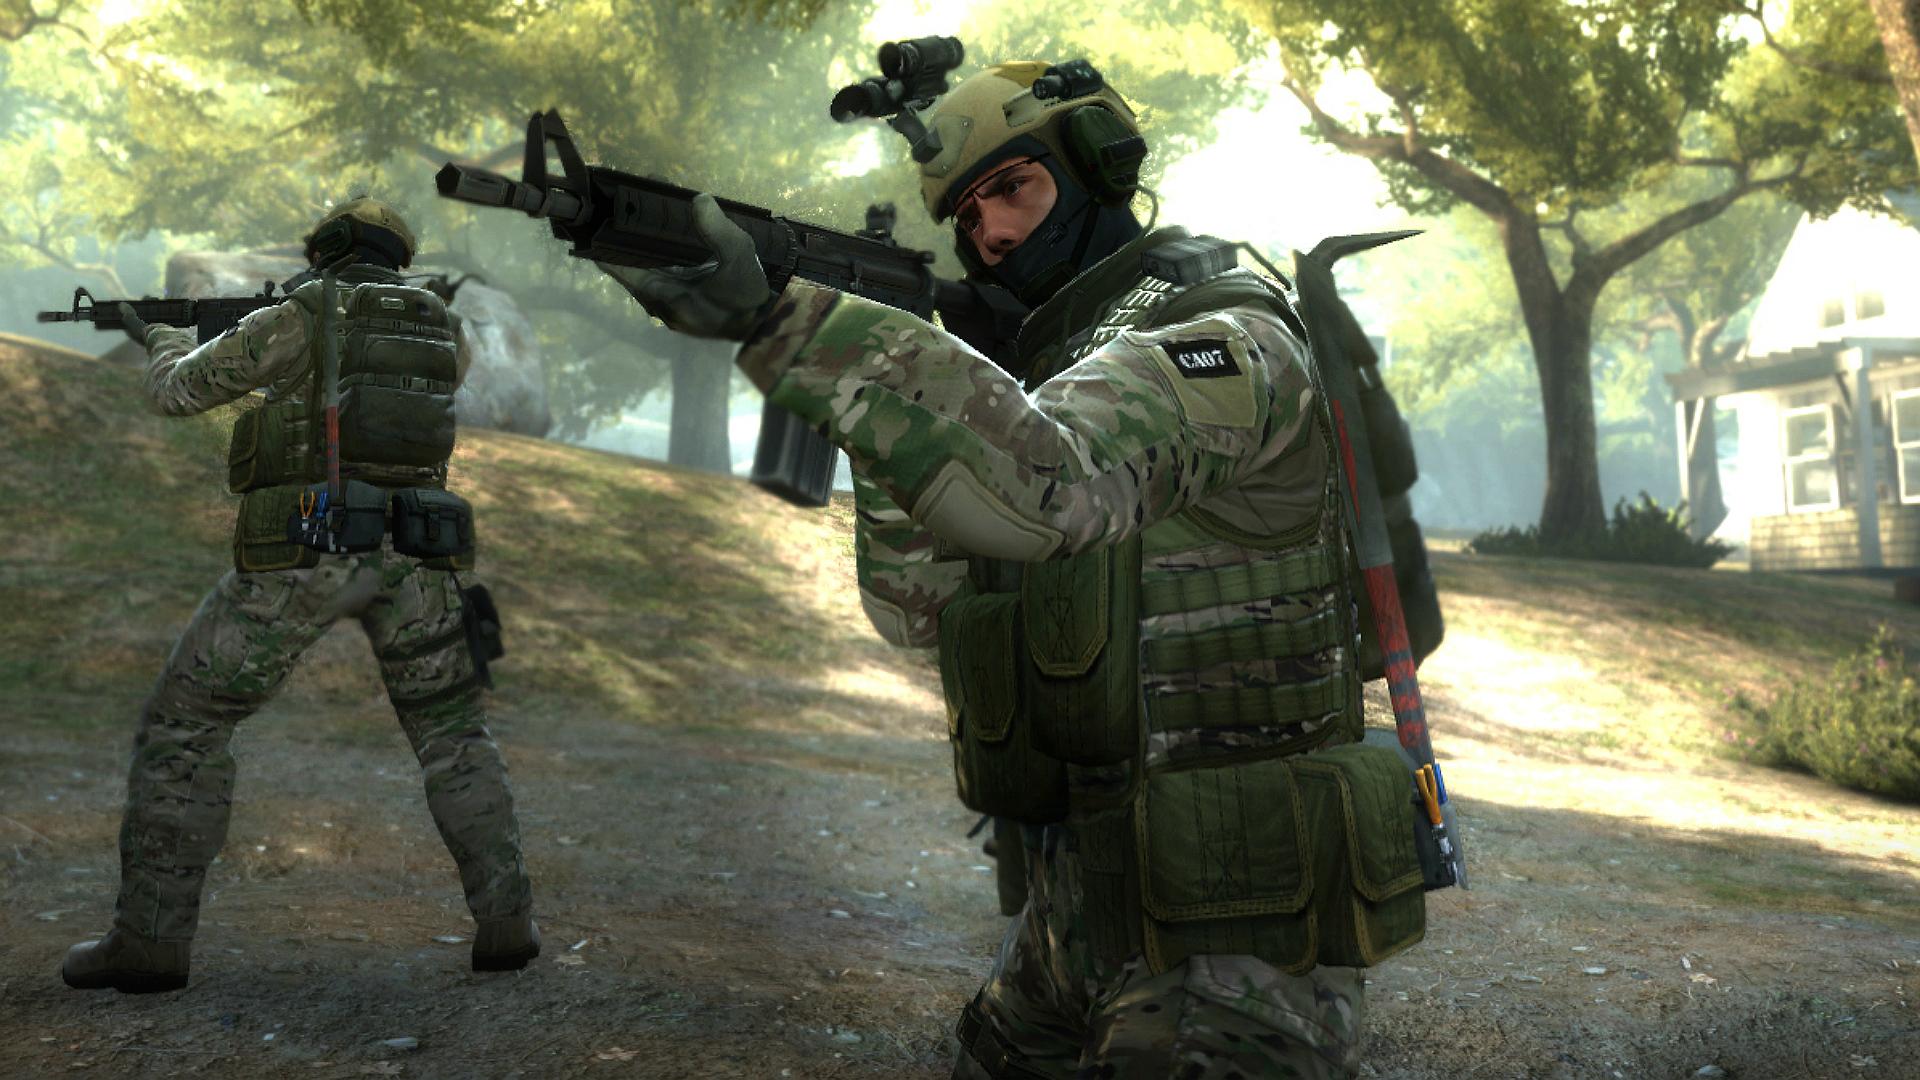 CS2: Missing Features From Counter-Strike 2 - News